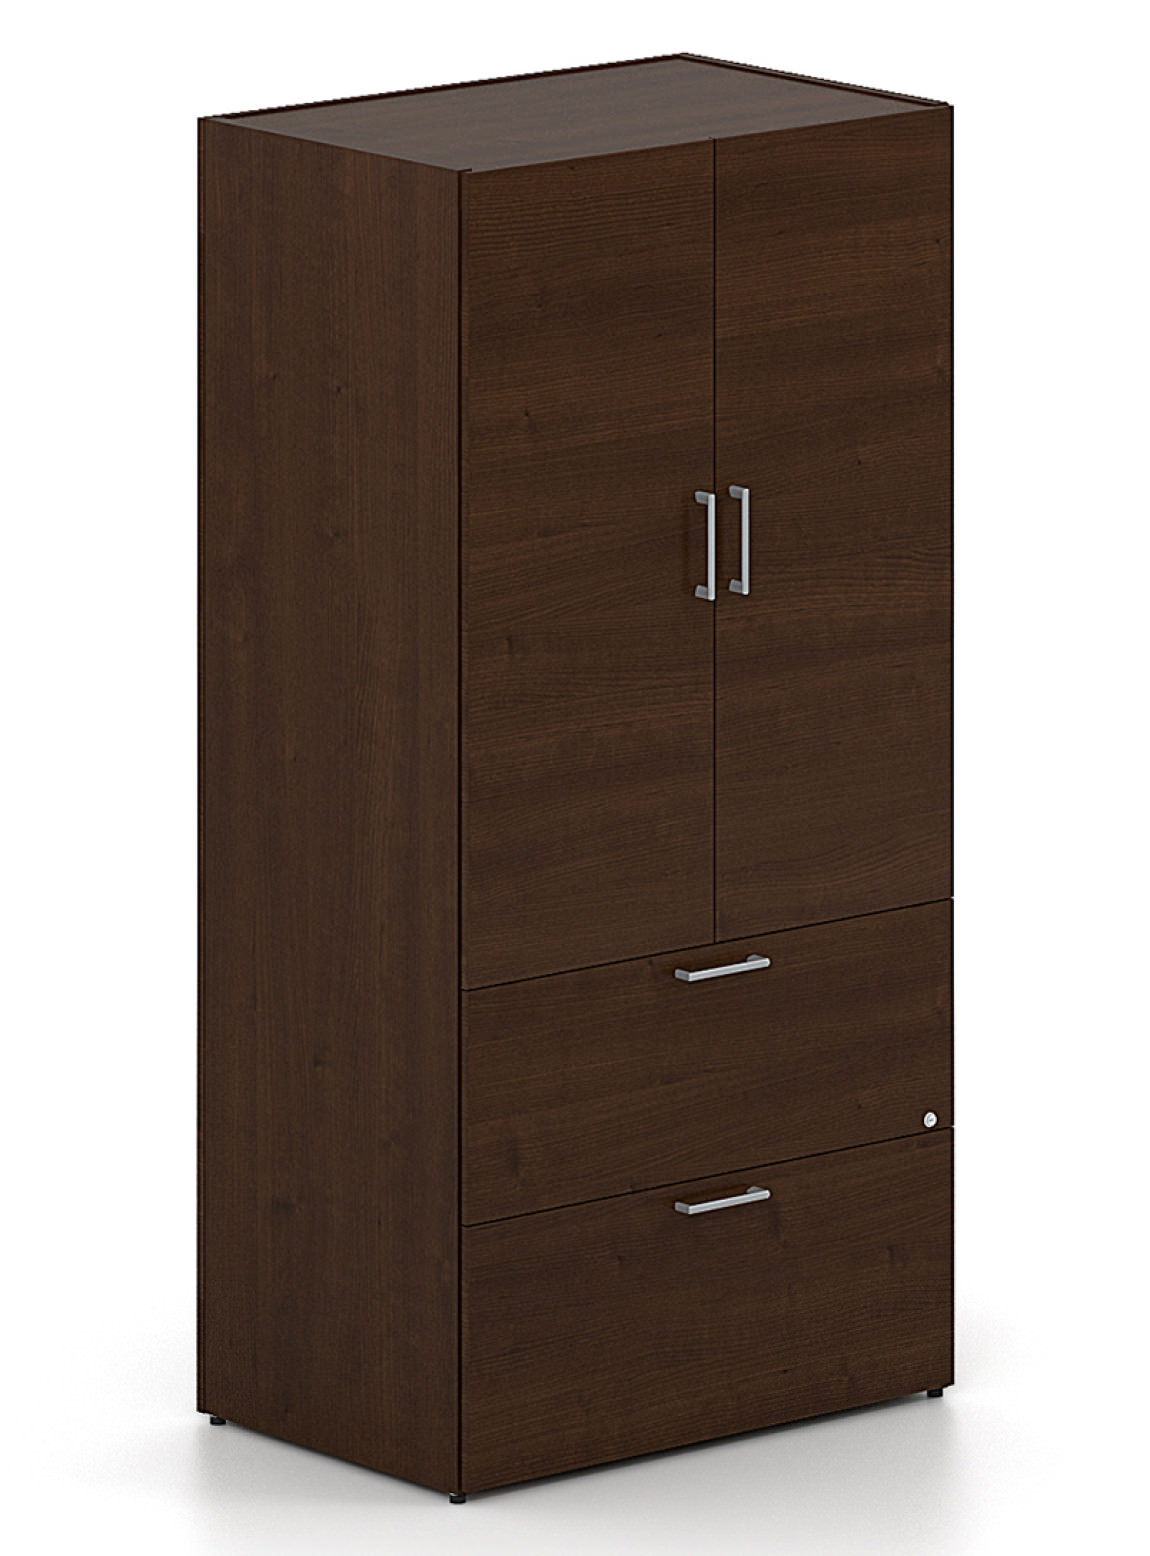 Vertical Storage Cabinet with Lateral File Drawers